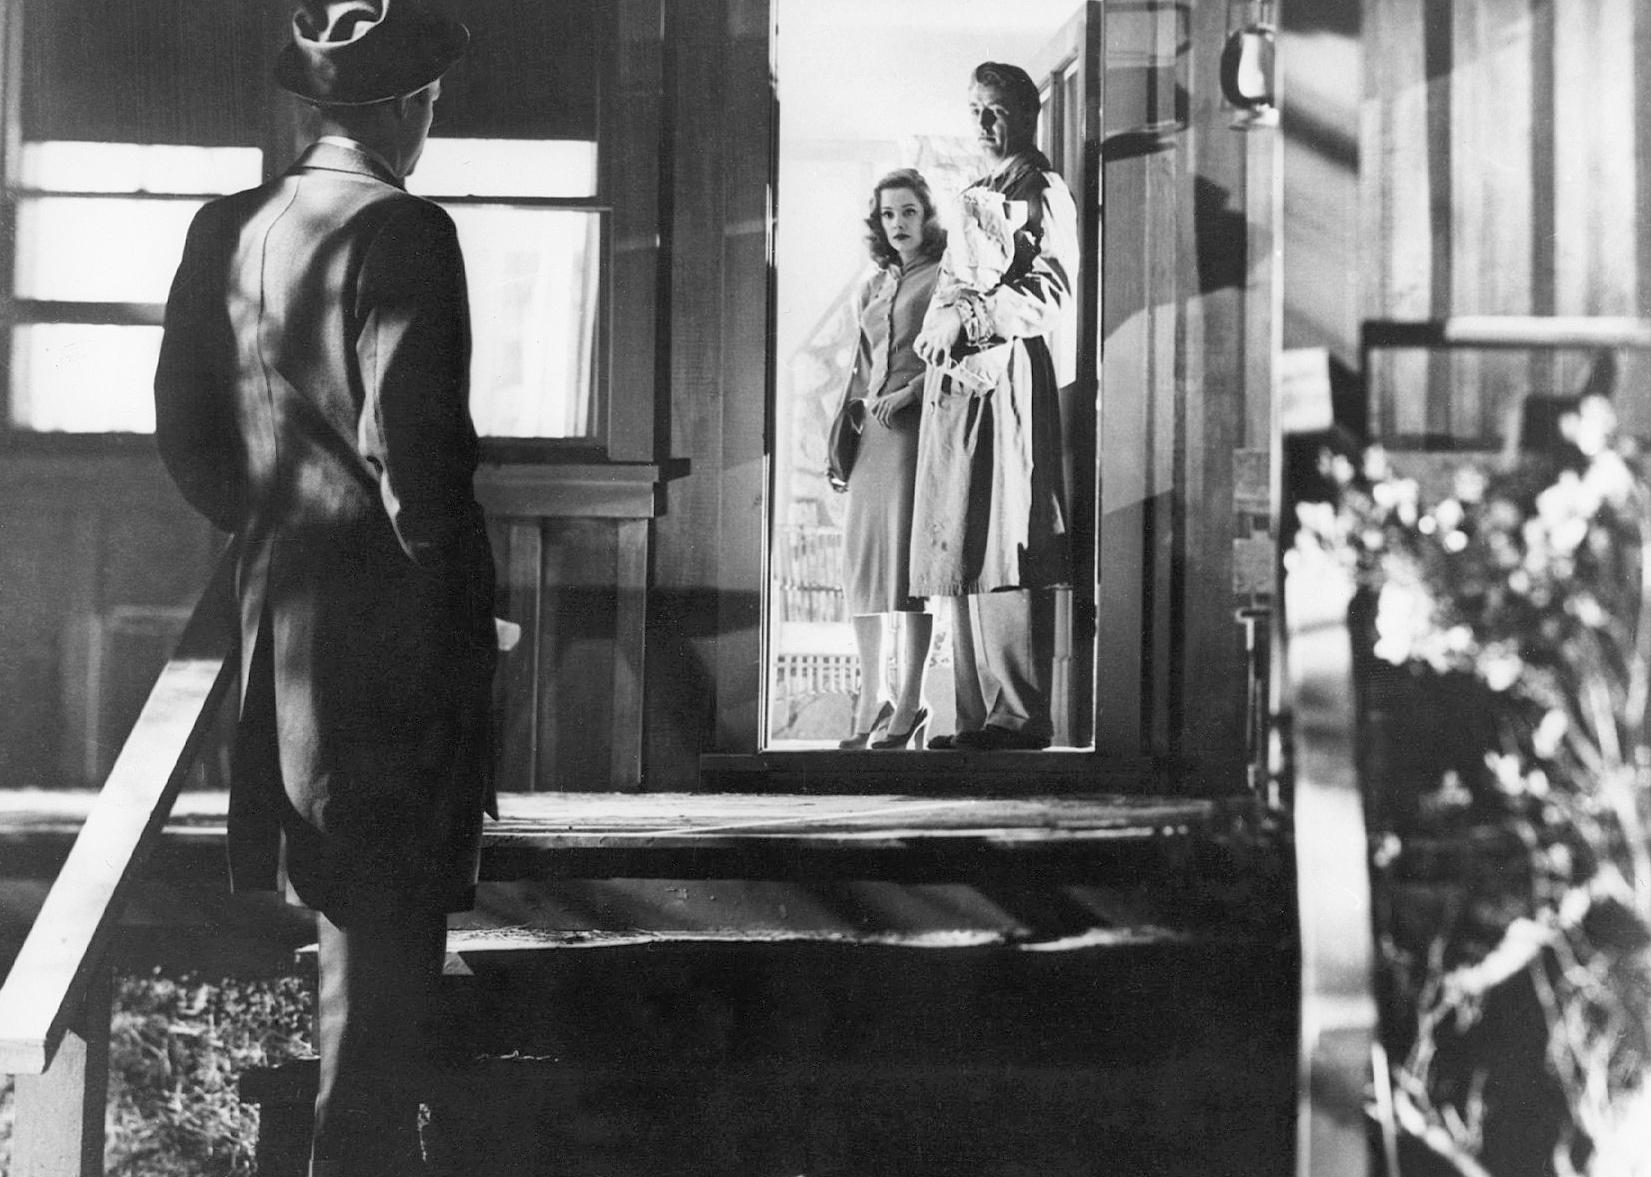 A nicely dressed man and woman stand in a doorway on a porch with a darkly lit figure at the bottom of the stairs looking at them.